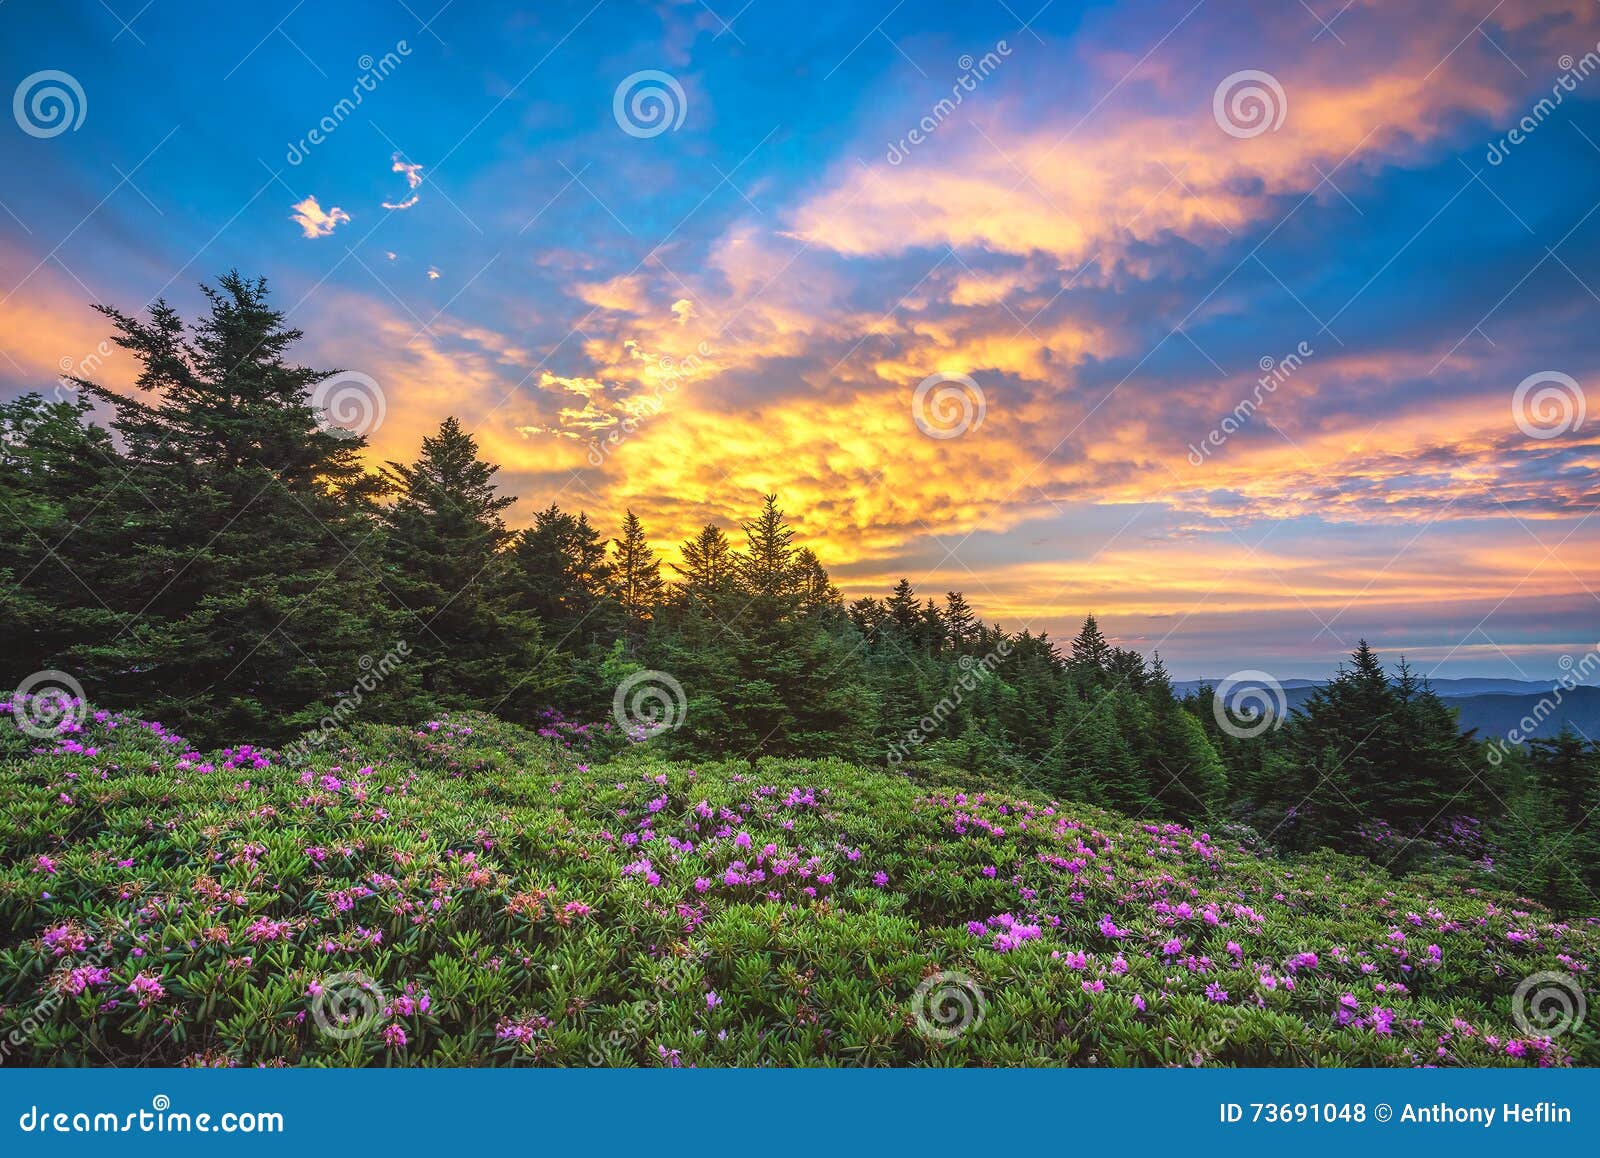 rhododendron gardens, roan mountain, tennessee